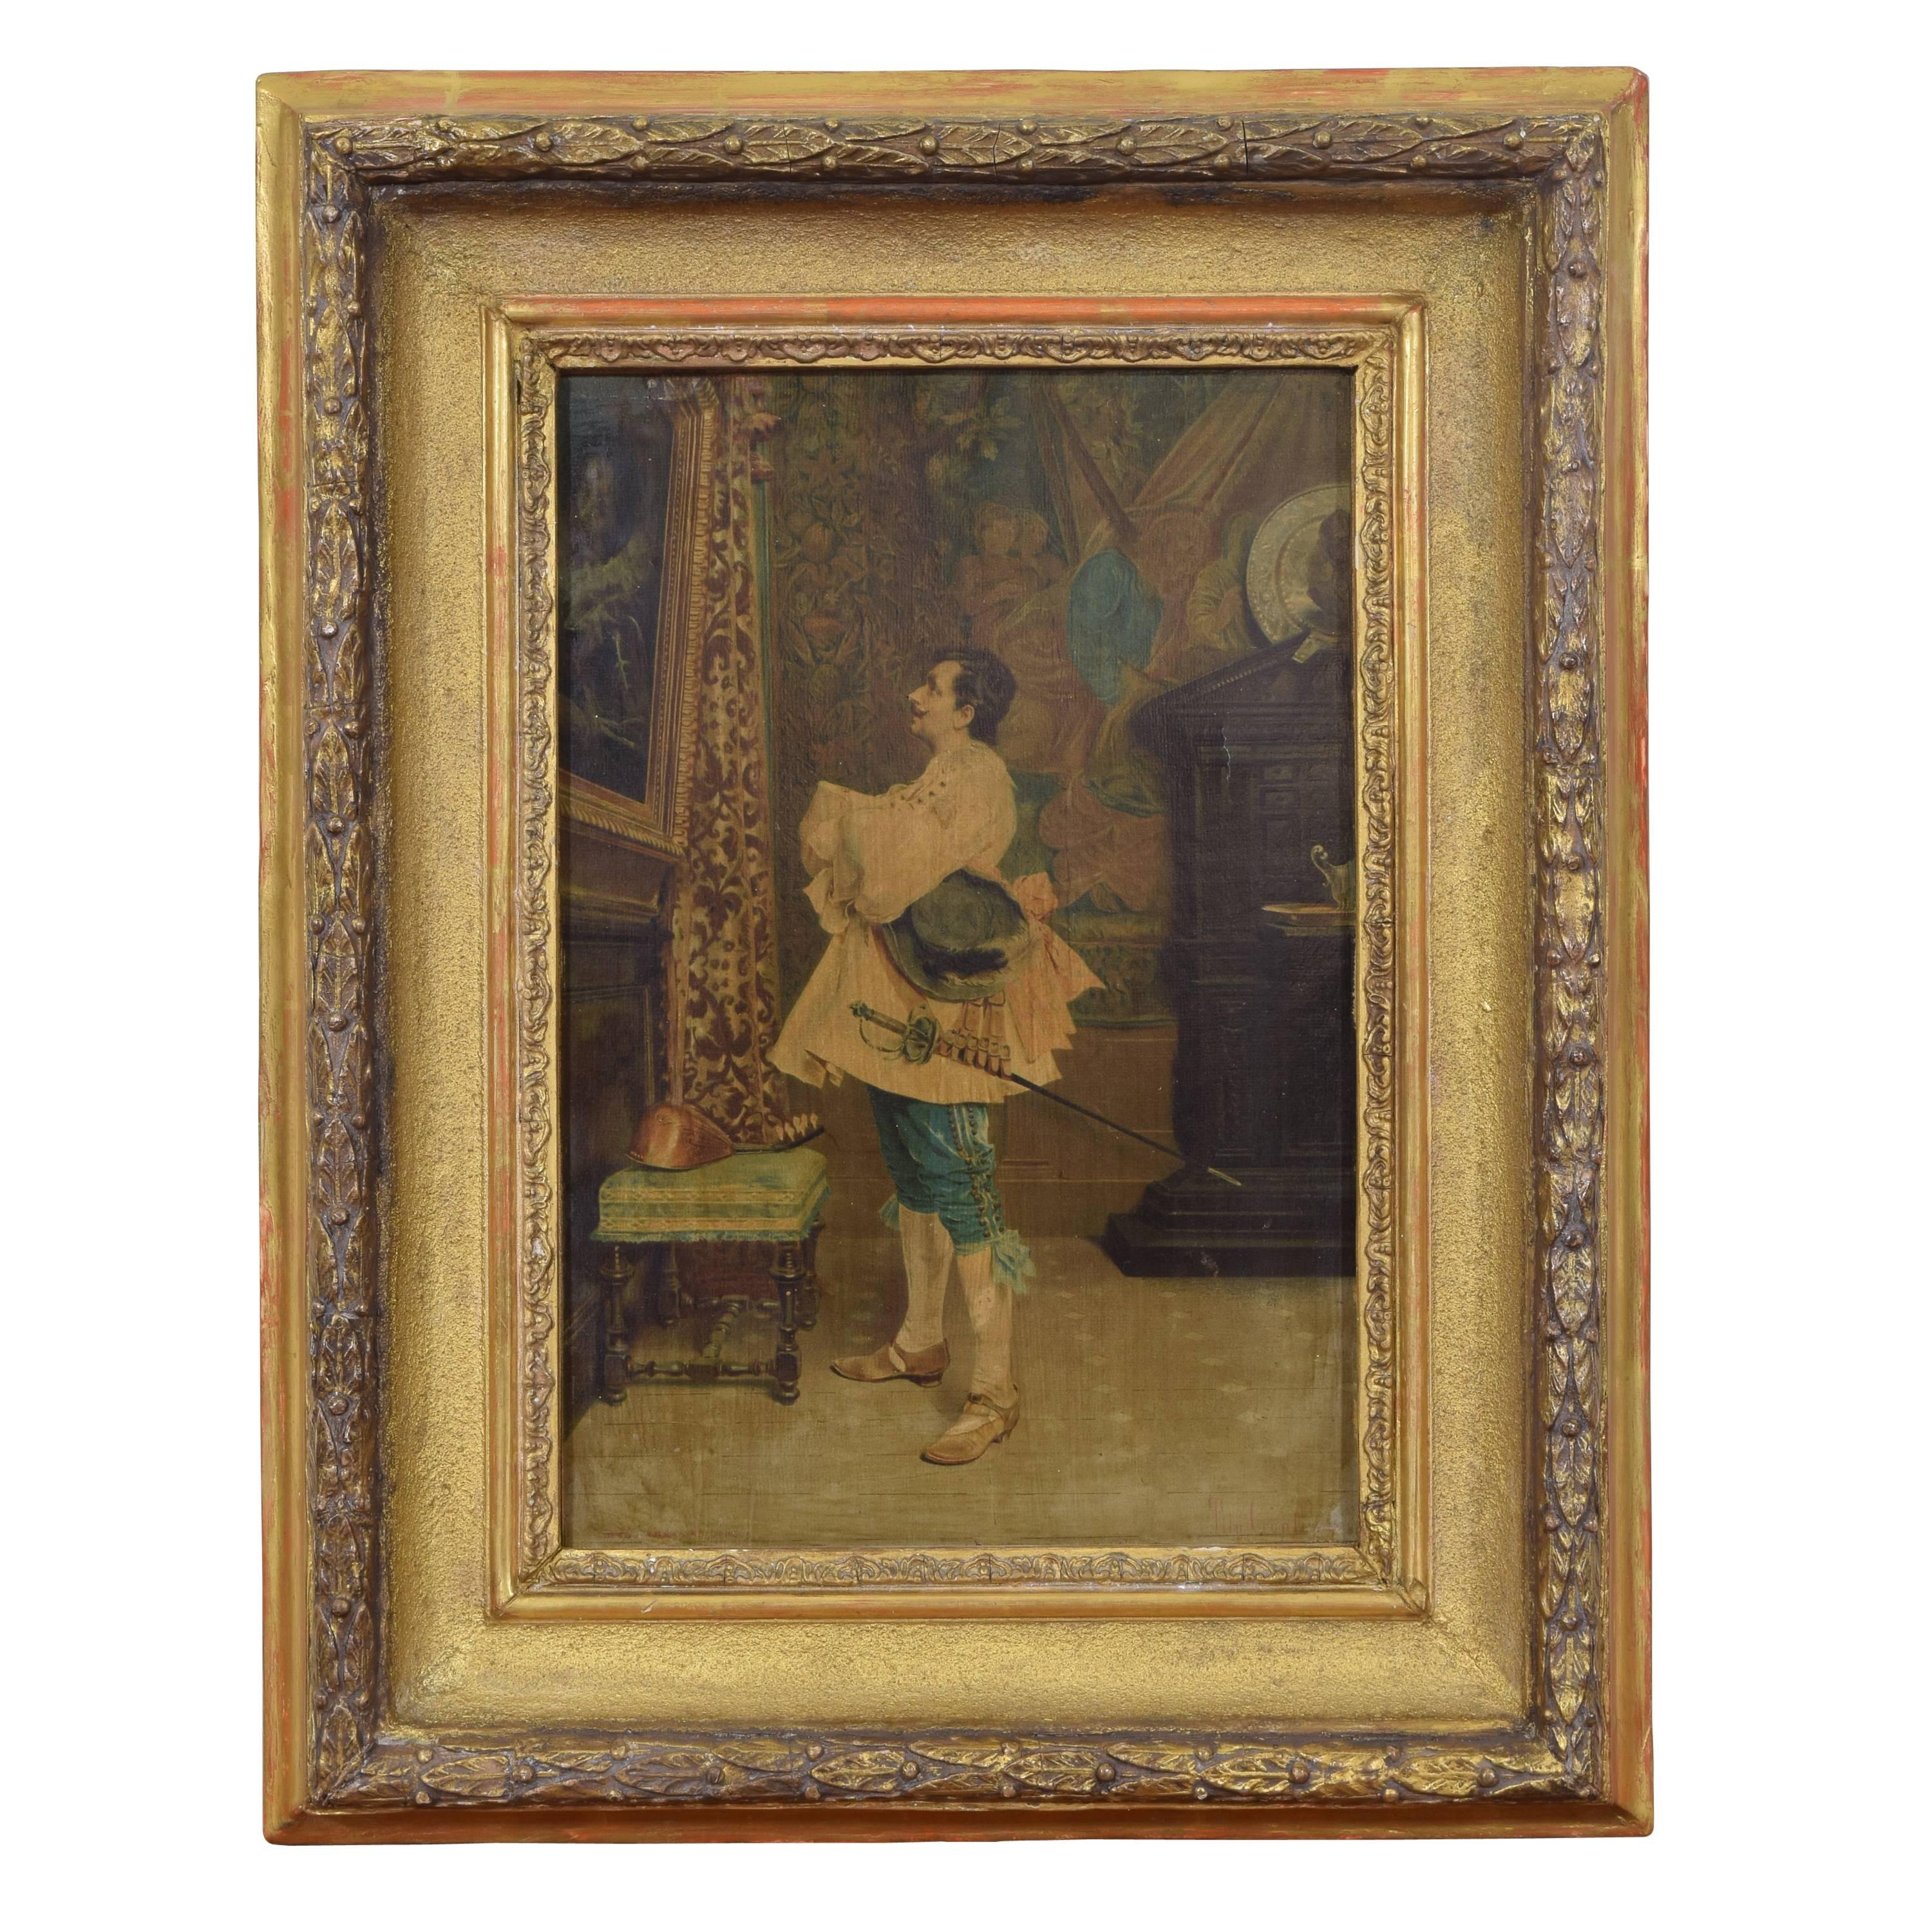 Oil on Canvas in Giltwood Frame, Musketeer in Interior with Antiques